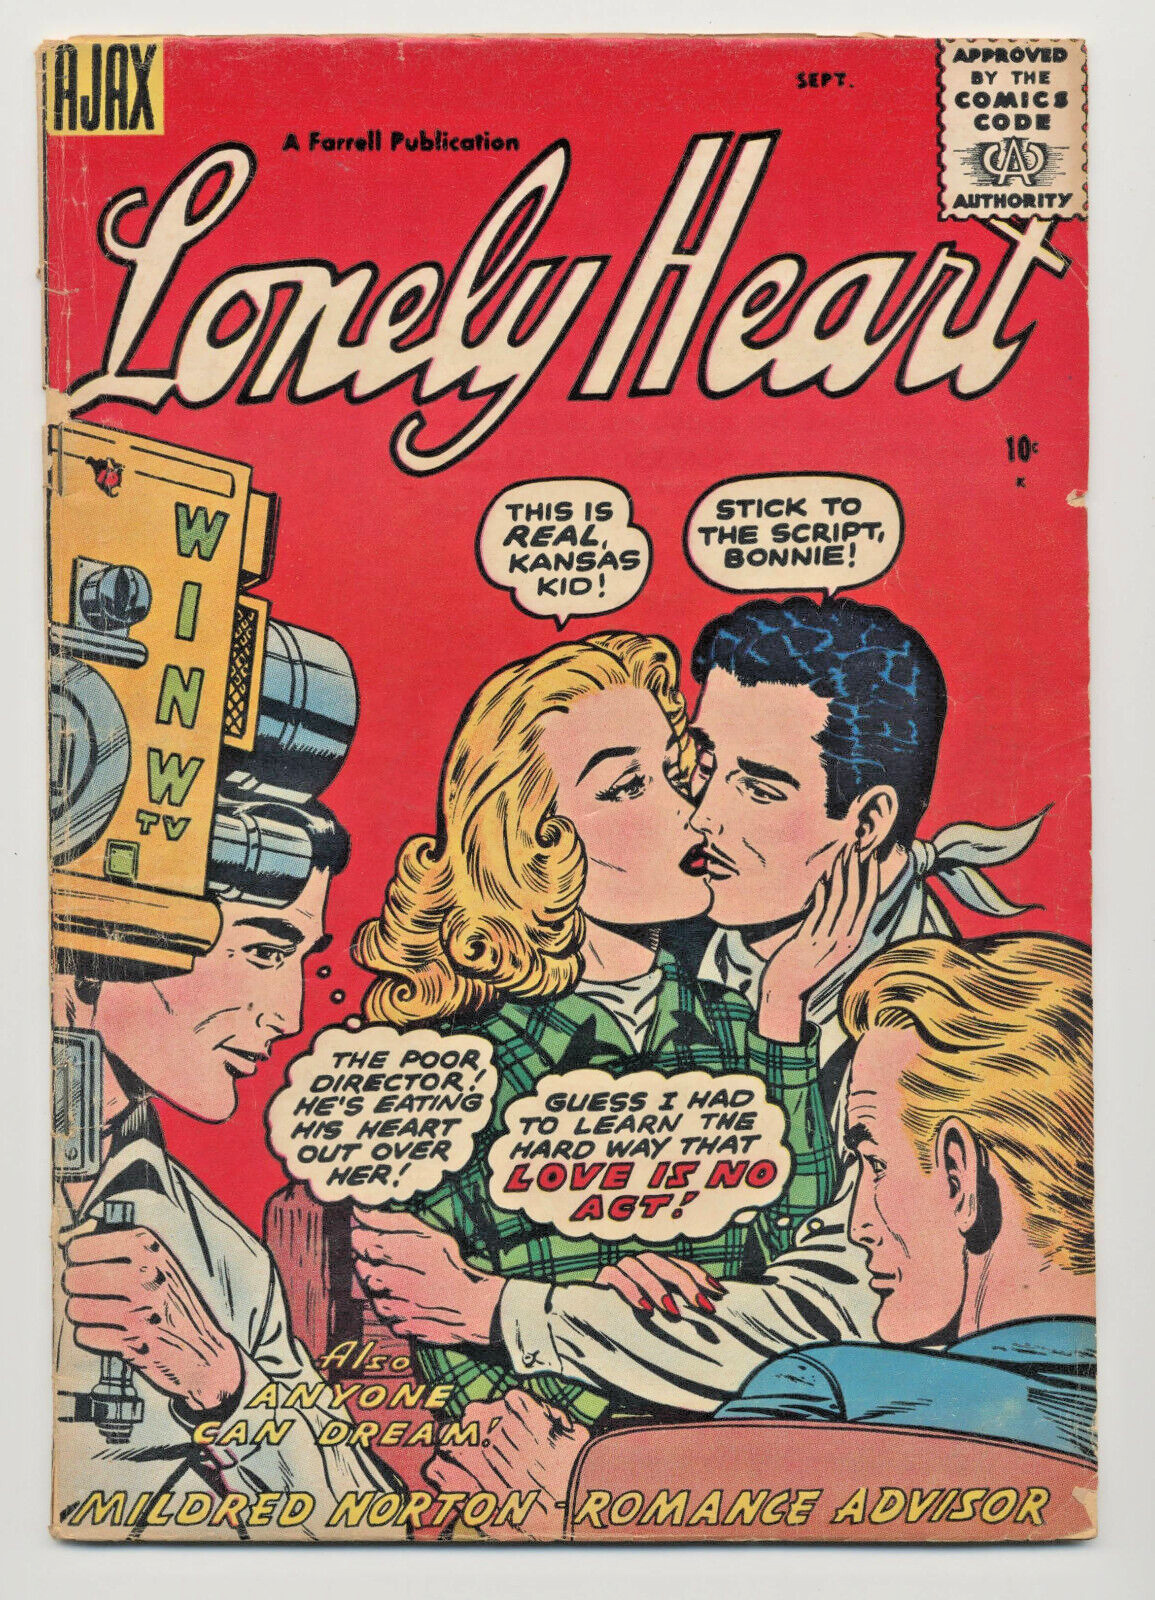 Lonely Heart Vol. 1 No. 12 - September 1955